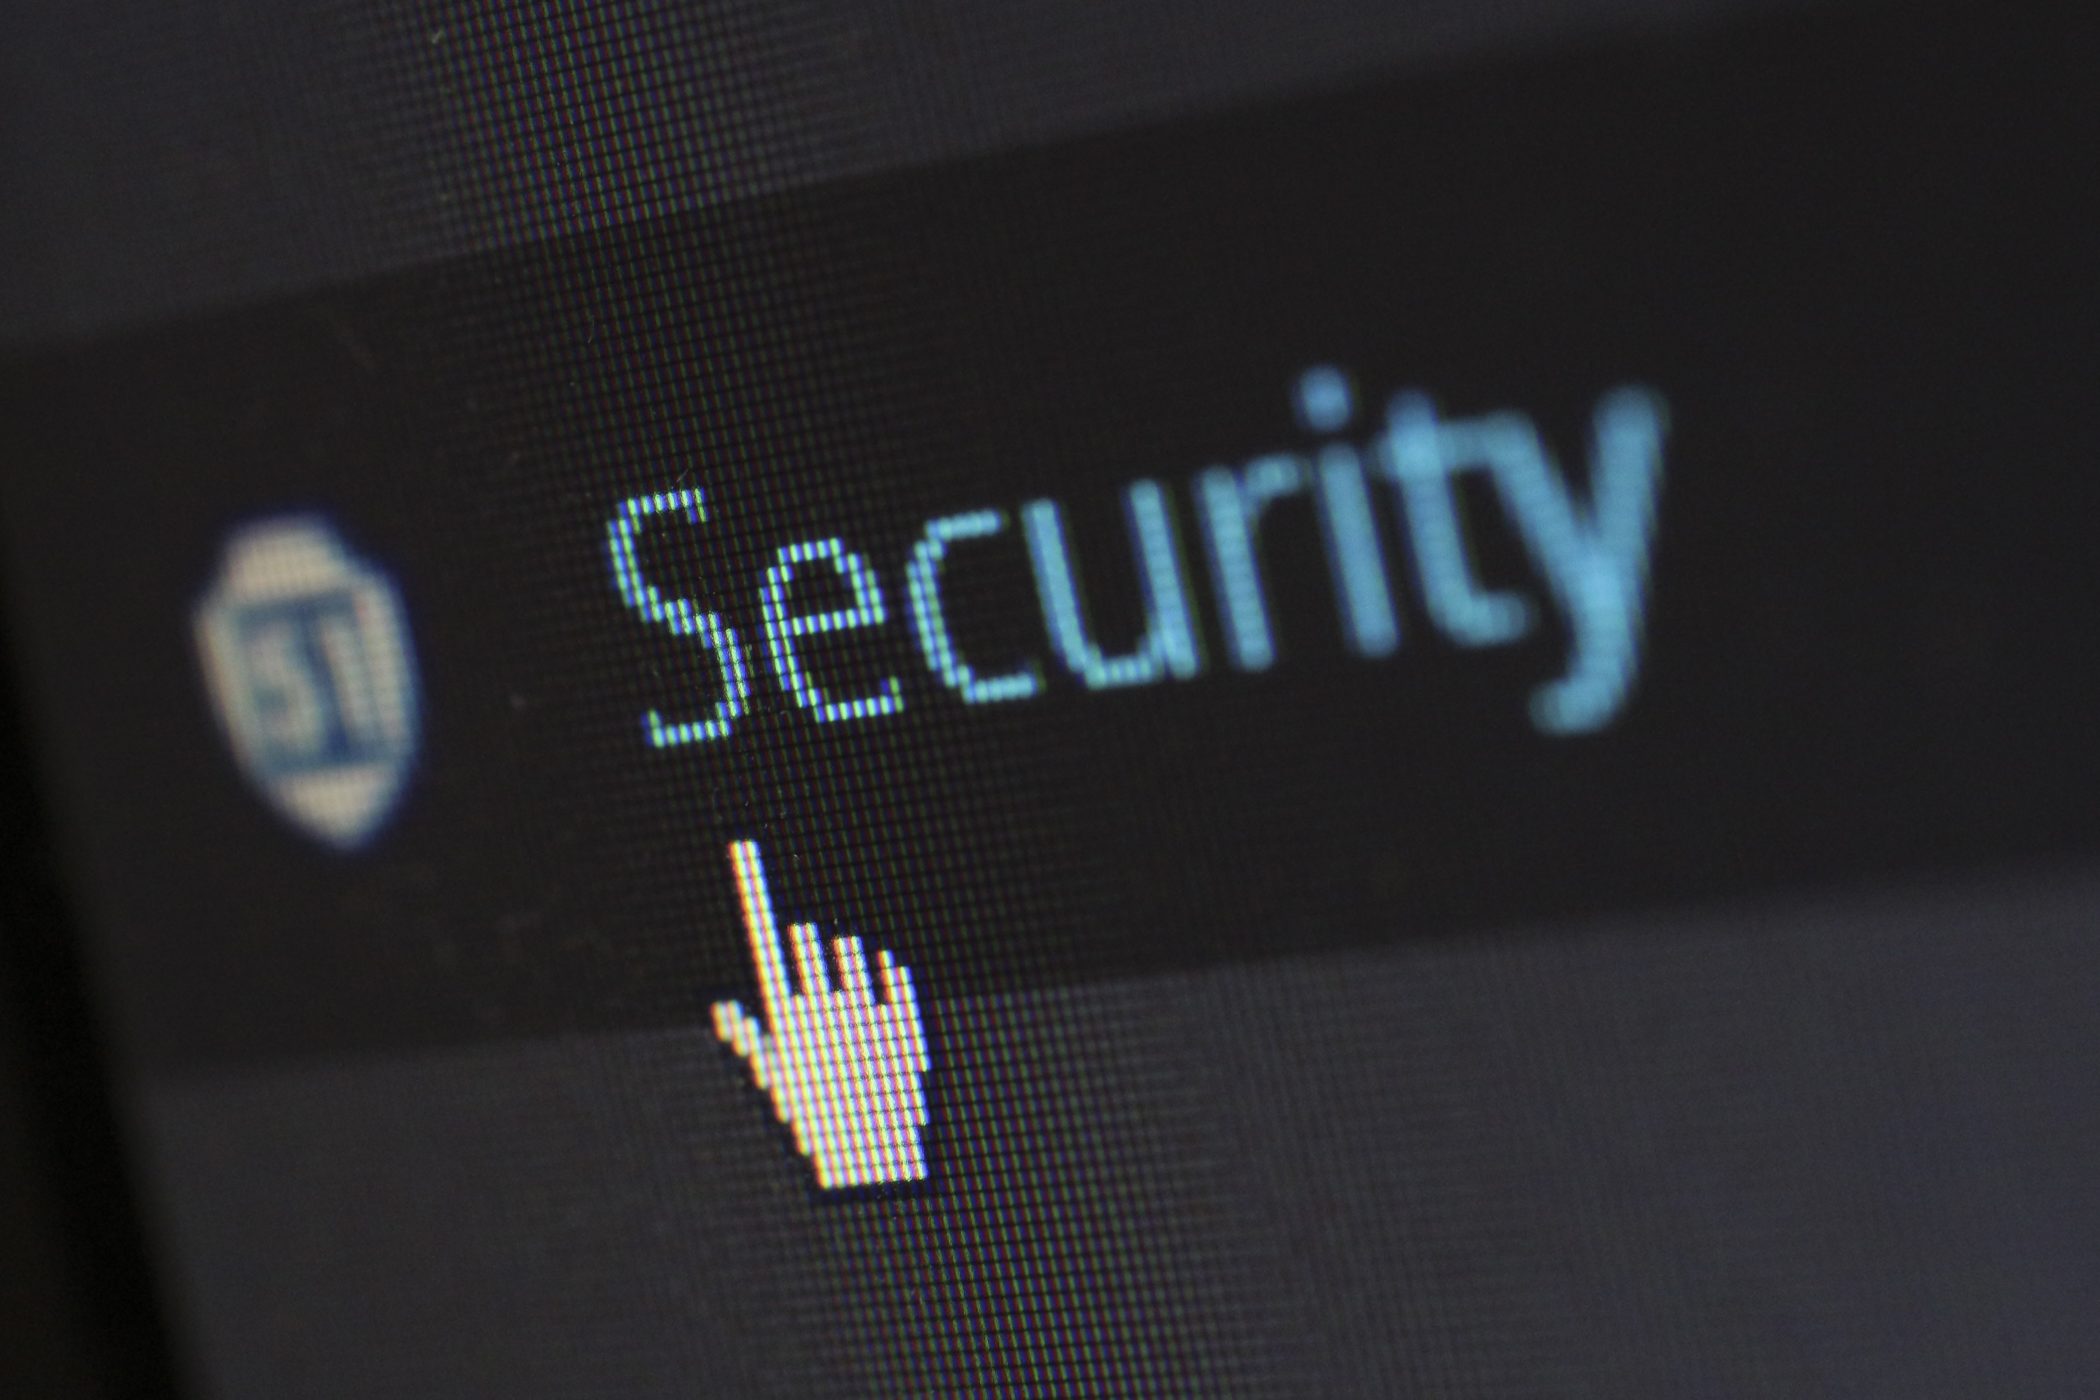 4 criteria to consider when choosing security software